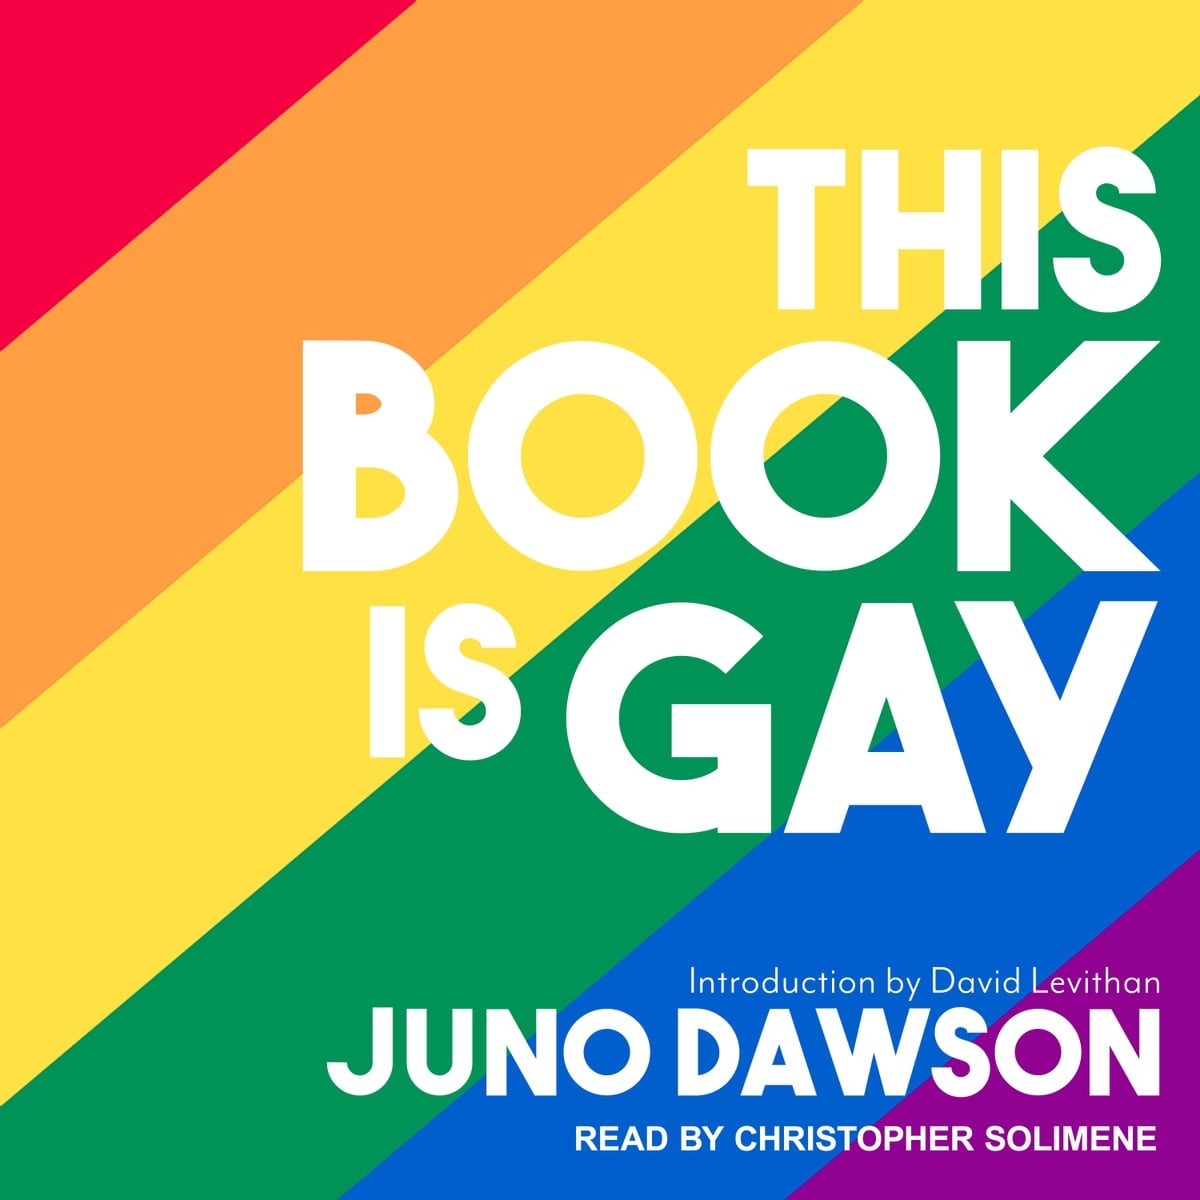 The book cover of "This Book is Gay" by Juno Dawson